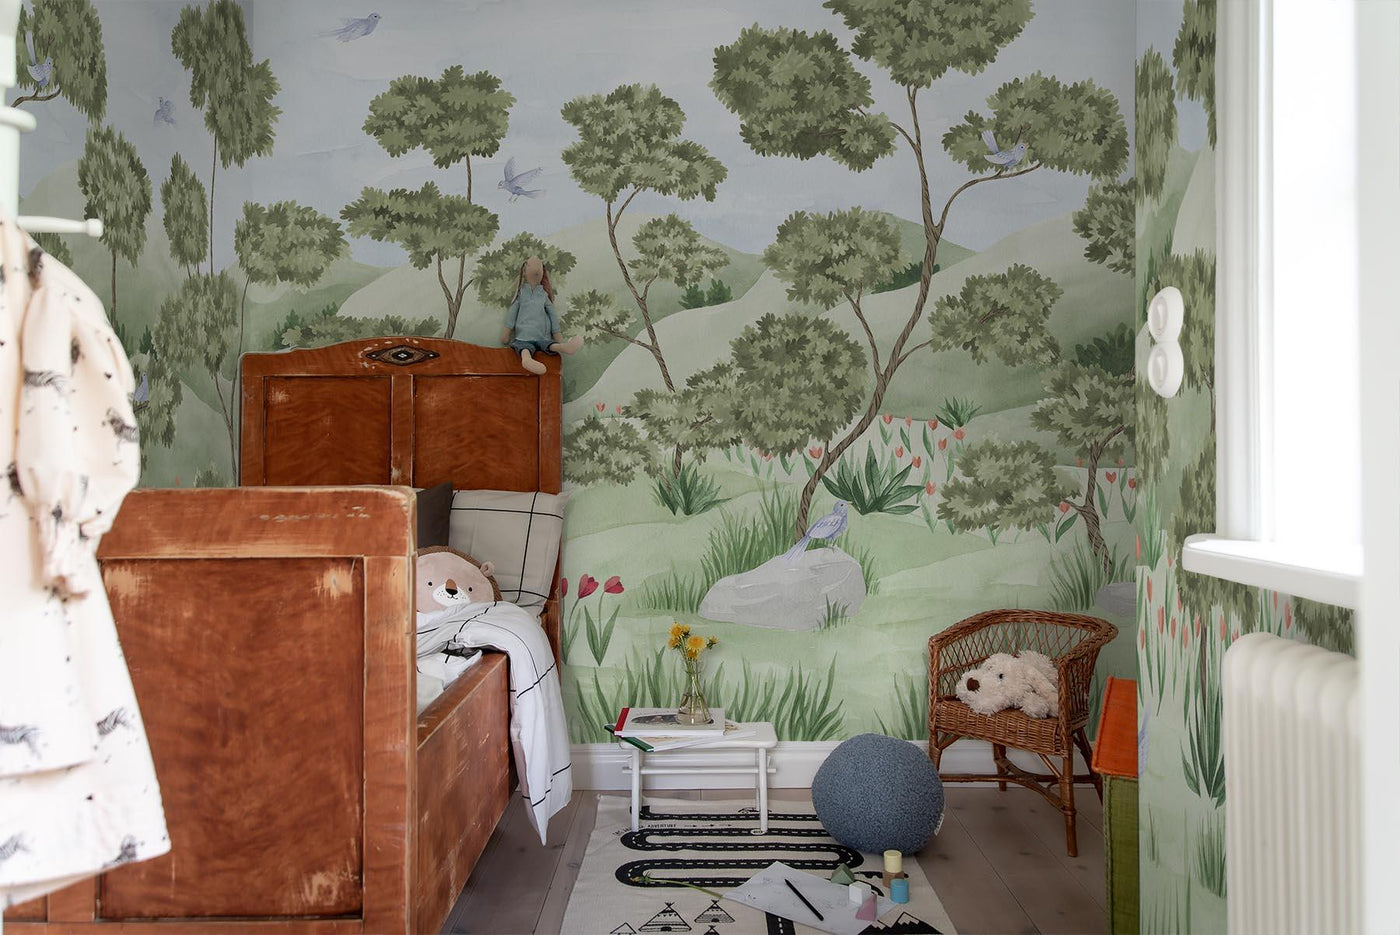 whimsical green wall mural of trees and birds in landscape on the walls of this kids room. Brown vintage kids bed in wood. Grey wooden floor. Toys on the floor